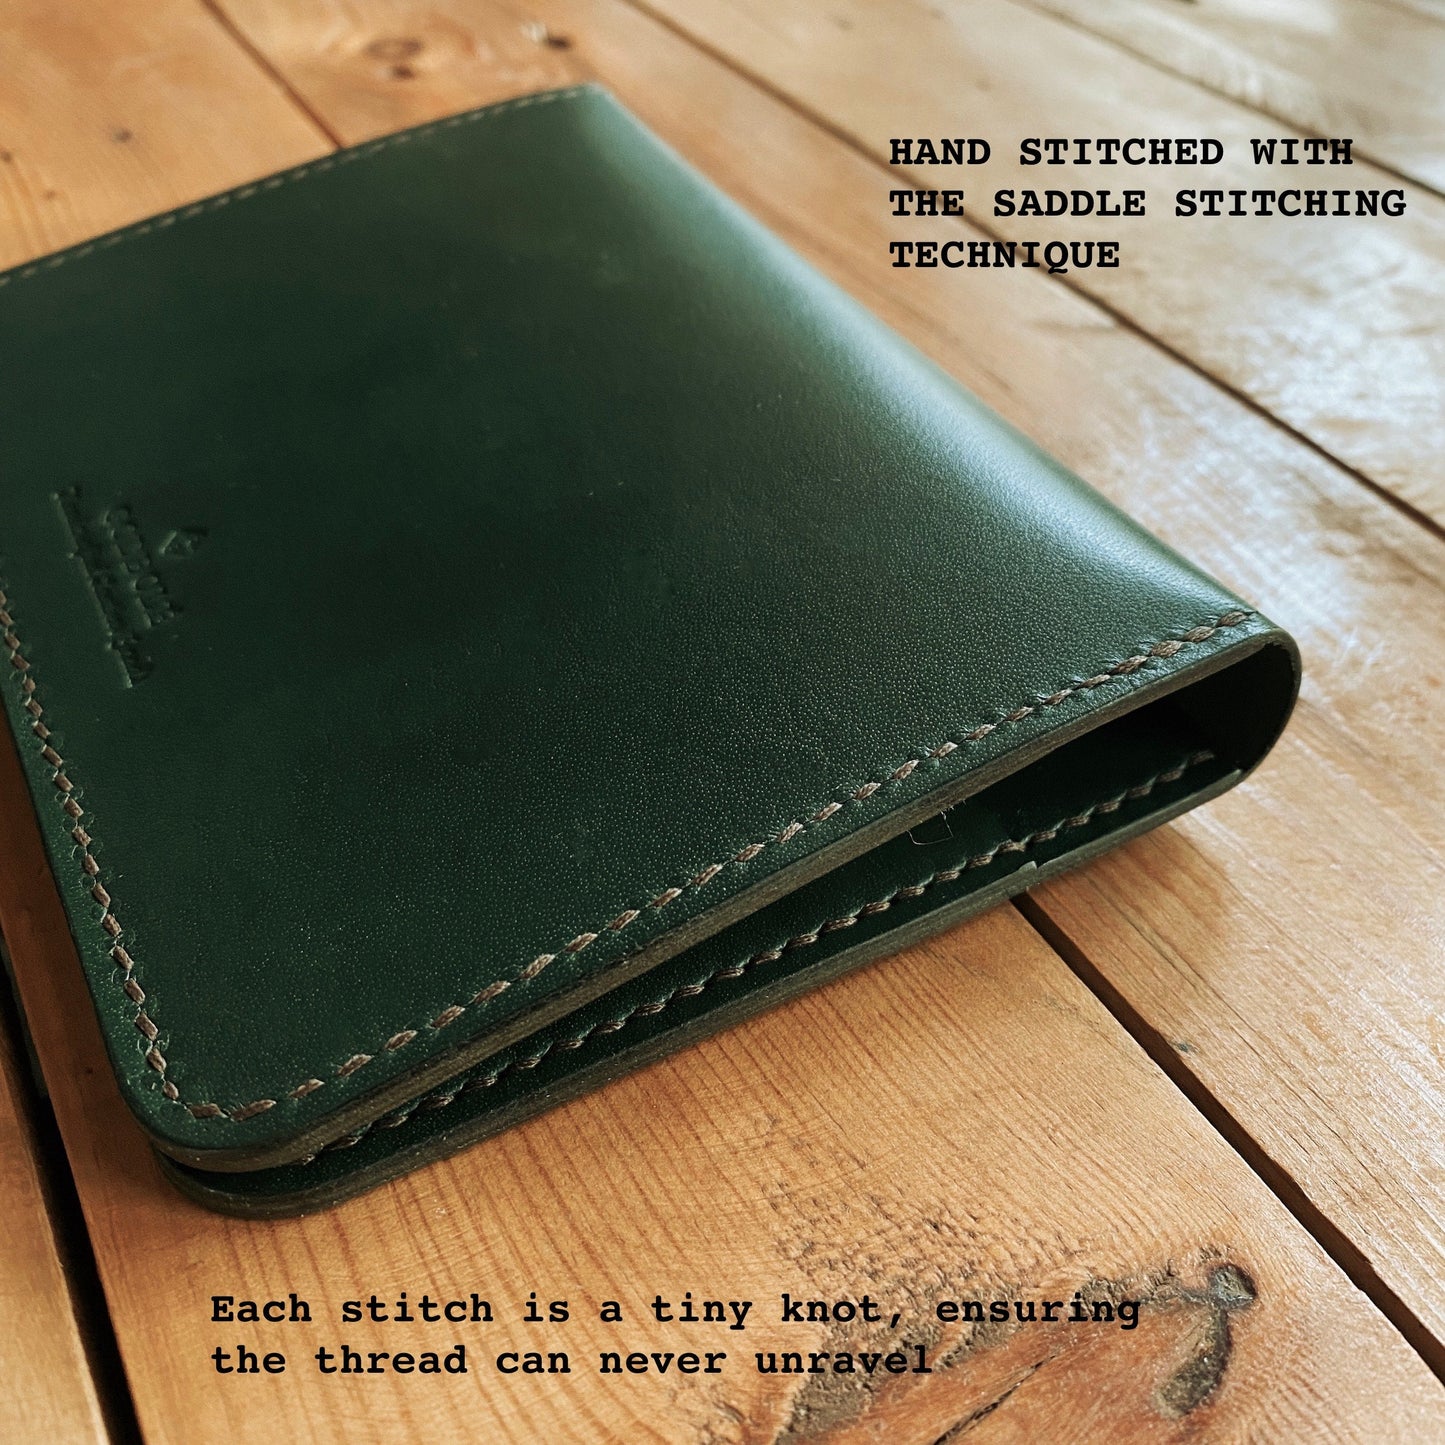 Large Passport Wallet - Racing Green - Clearance